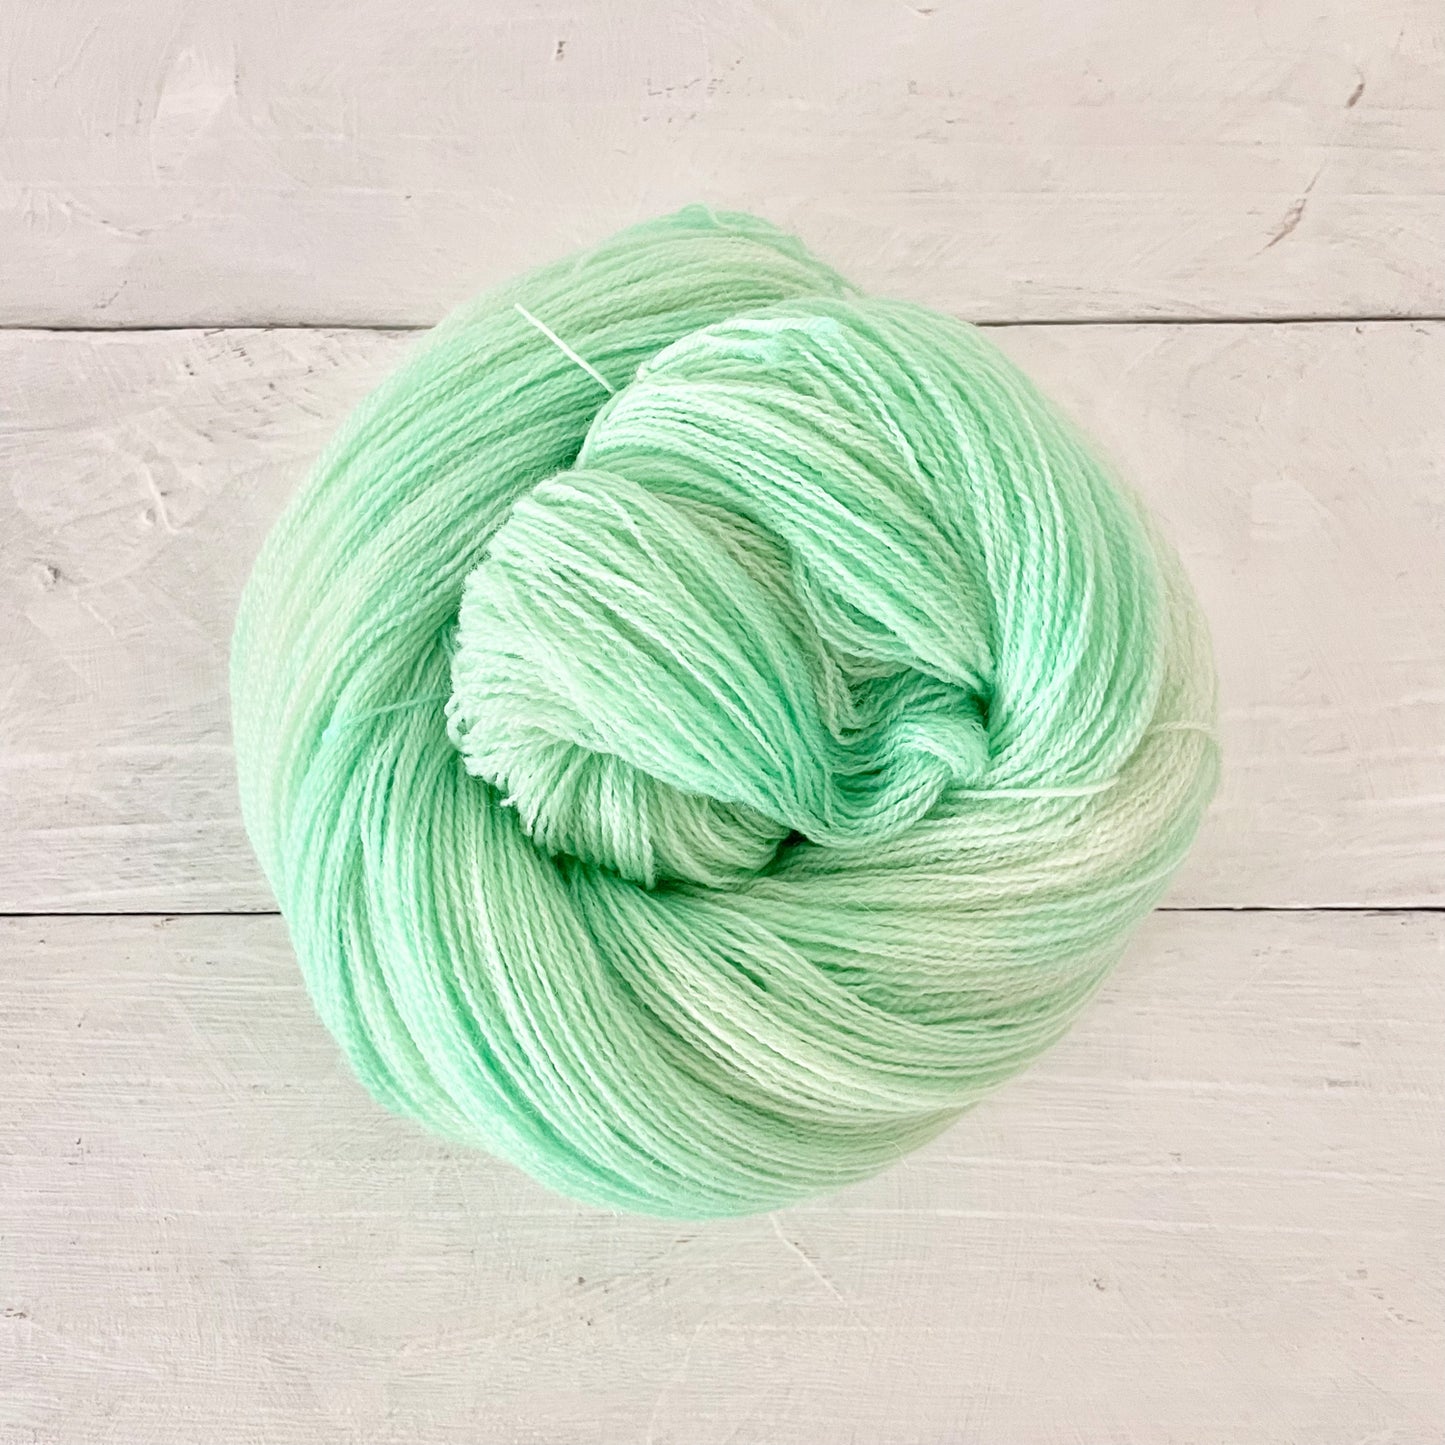 Hand-dyed yarn No.113 lace "Frühling übers Jahr"